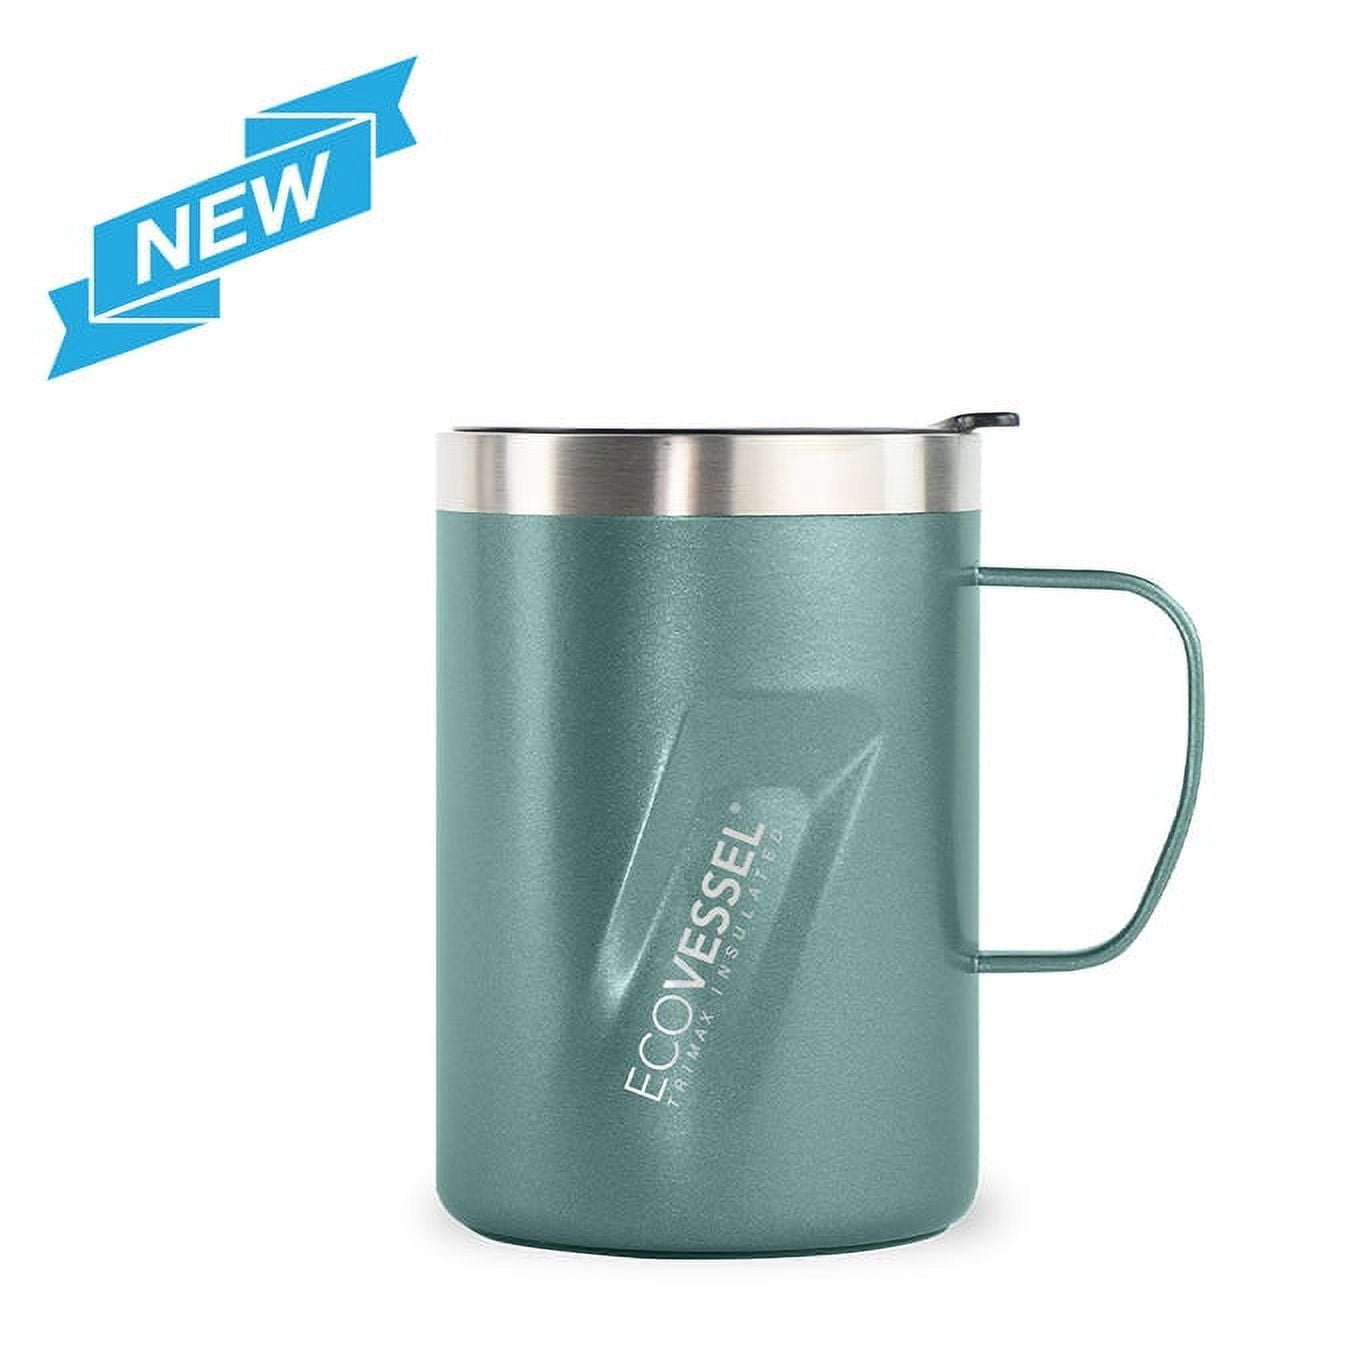 EcoVessel Metro Trimax Vacuum Insulated Stainless Steel Tumbler Cup, Coffee Mug with Slider Lid - 16 oz (Aqua Jade), Green